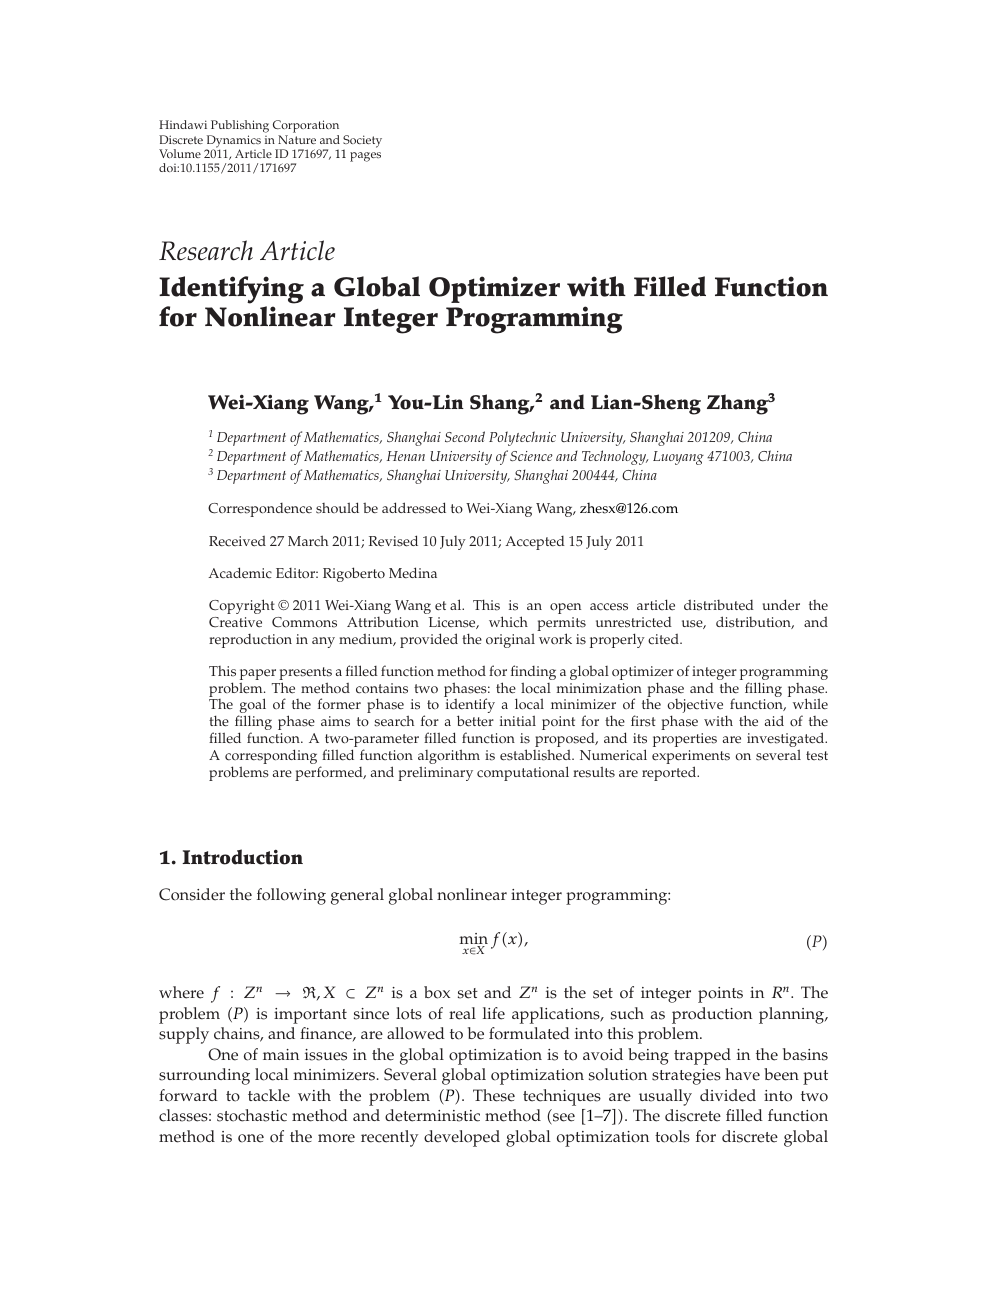 Identifying A Global Optimizer With Filled Function For Nonlinear Integer Programming Topic Of Research Paper In Mathematics Download Scholarly Article Pdf And Read For Free On Cyberleninka Open Science Hub